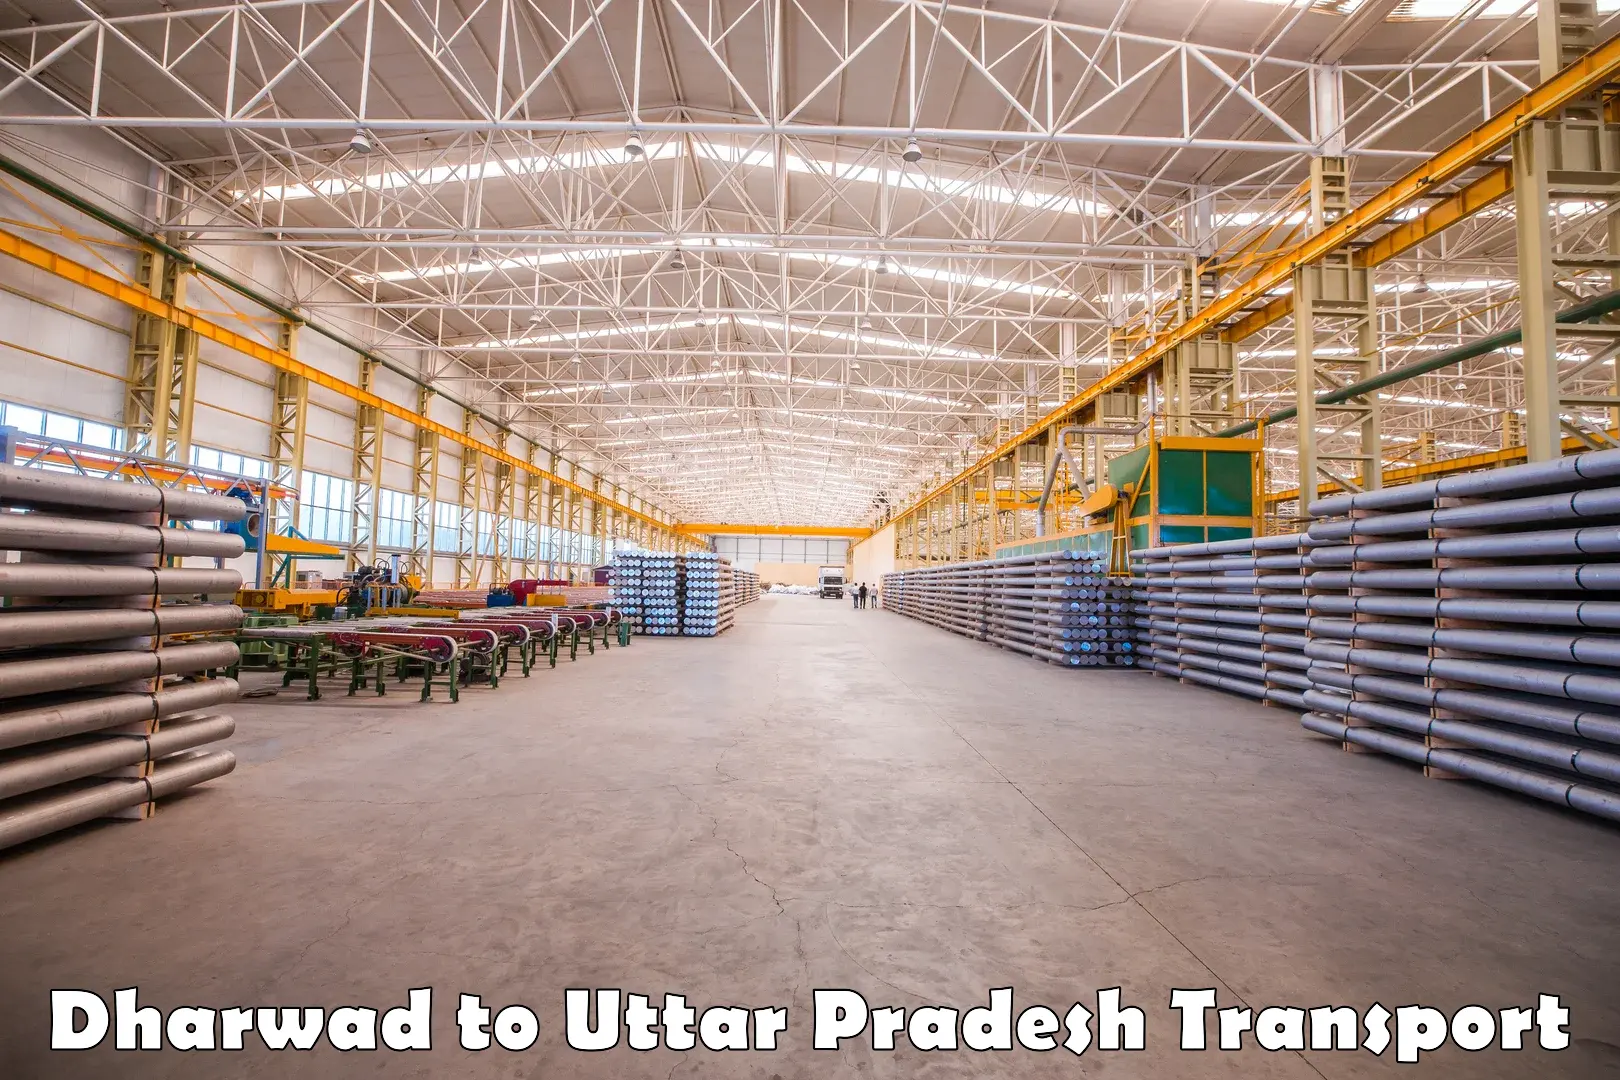 Daily parcel service transport Dharwad to Lucknow